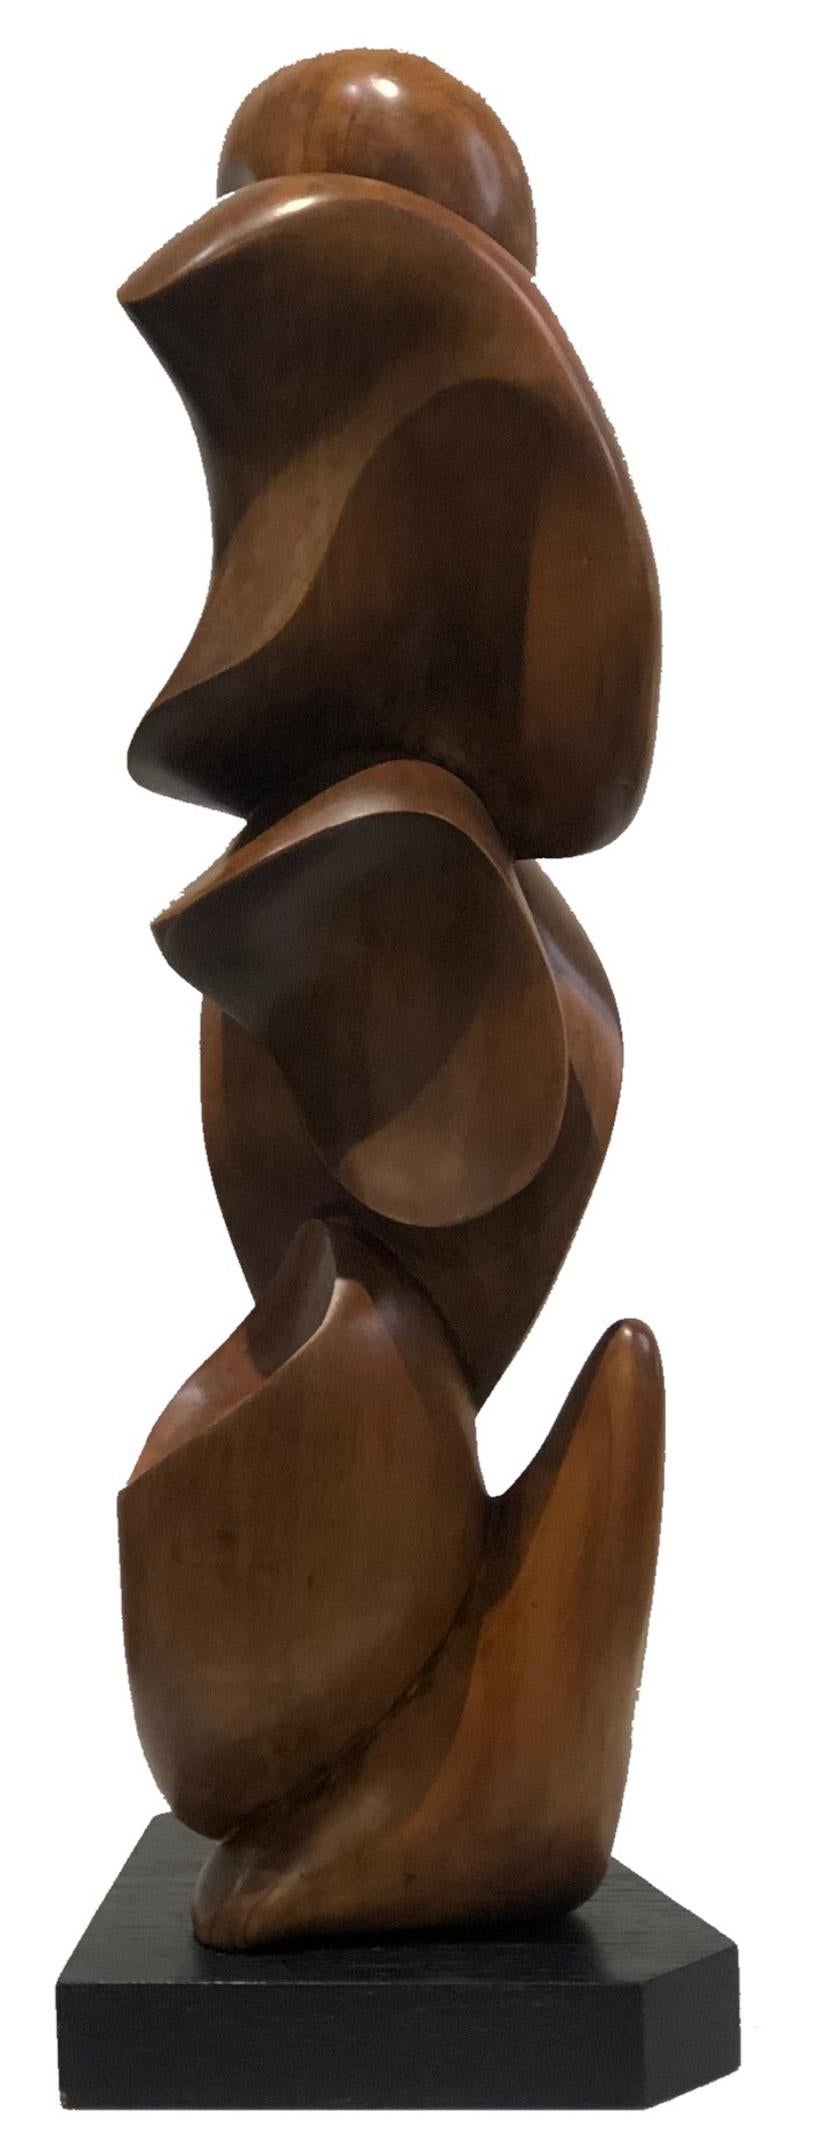 Mid-Century Modern
In the manner of Takao Kimura
Carved Elmwood
Abstract Sculpture
Japan, ca. 1960s

DIMENSIONS
Height: 17.75 inches            Width: 6.25 inches            Depth: 6 inches

ABOUT
A very stylish and elegant mid-century carved wood